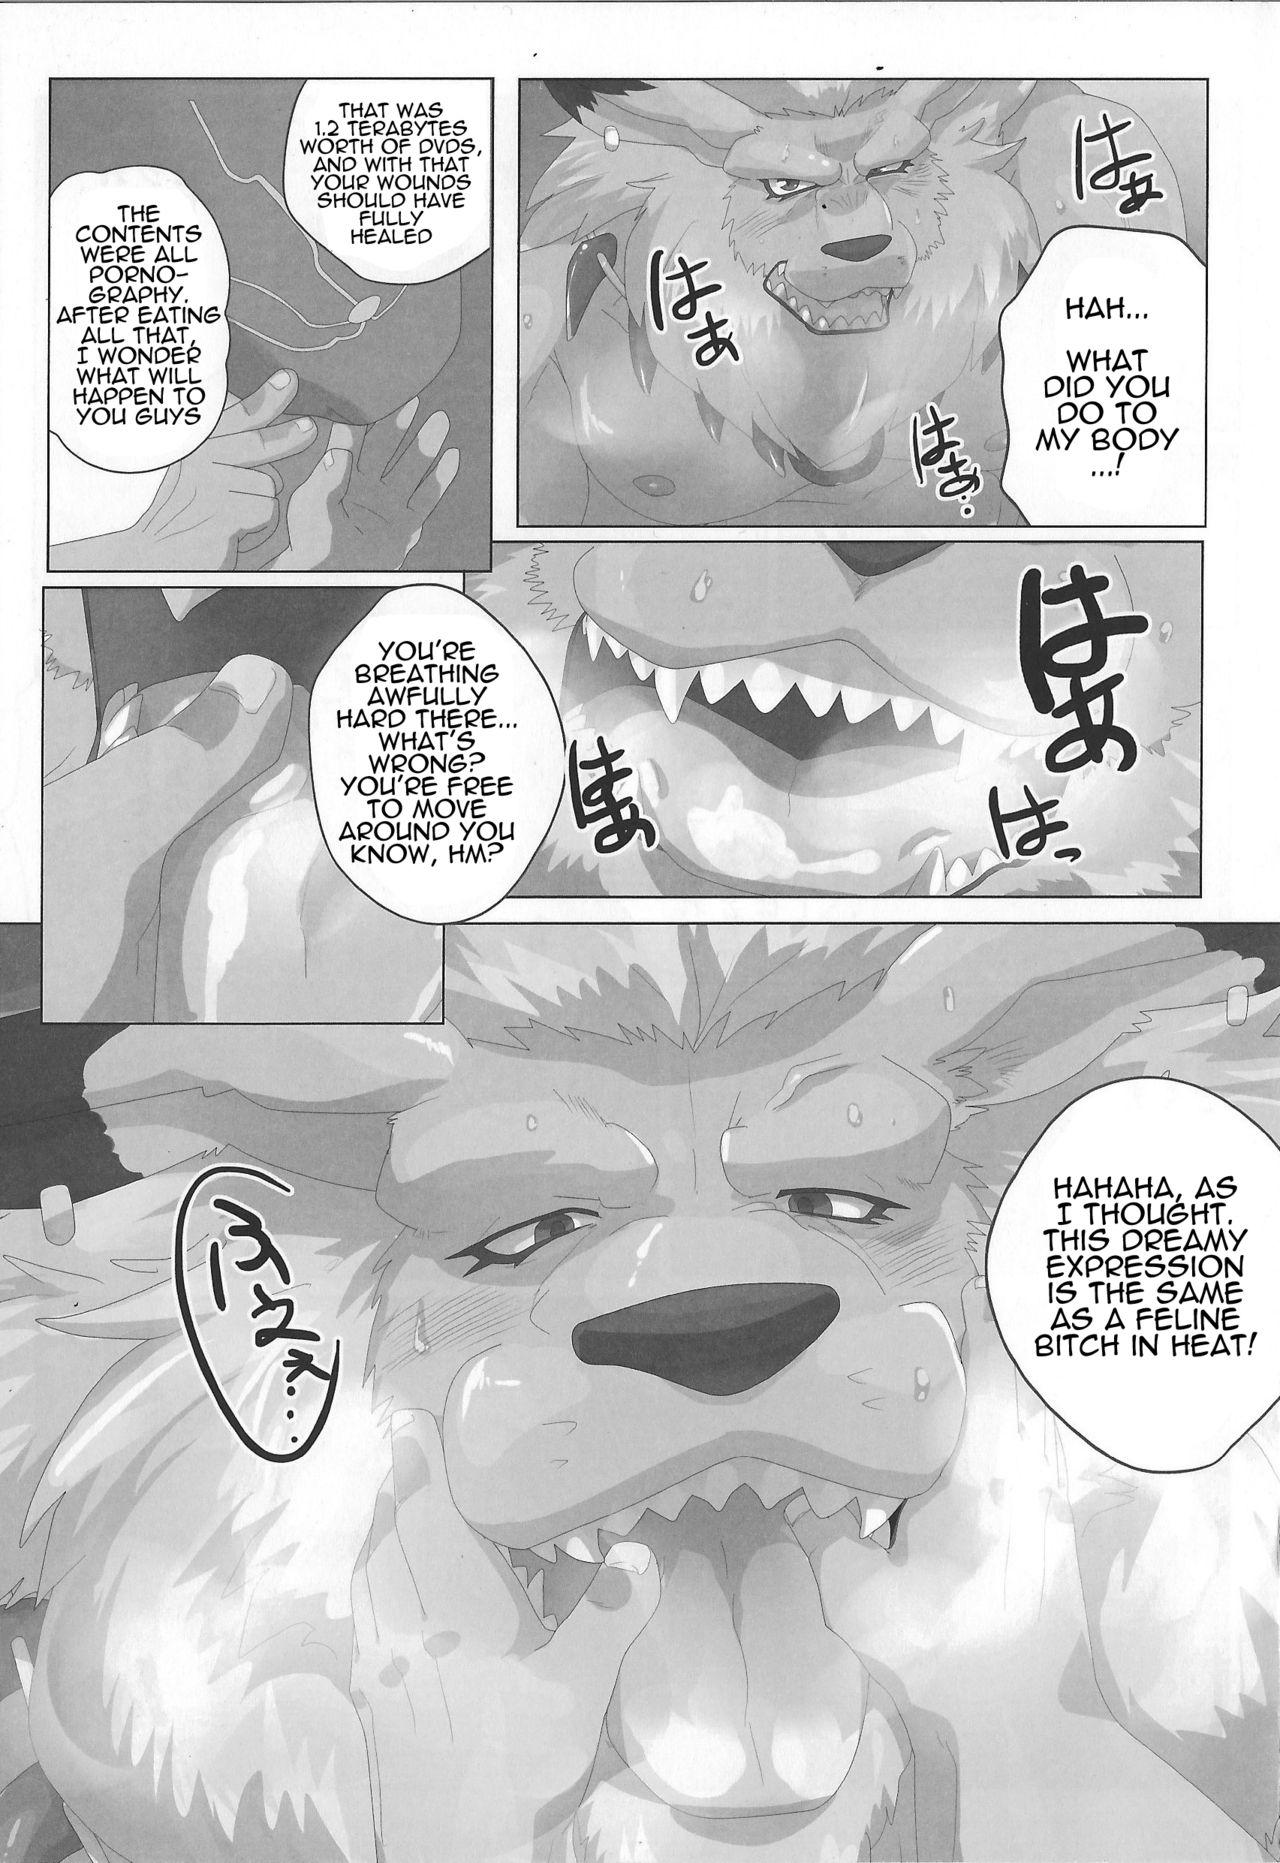 Farting [Debirobu] For the Lion-Man Type Electric Life Form to Overturn Fate - Leomon Doujin [ENG] - Digimon Solo Female - Page 9